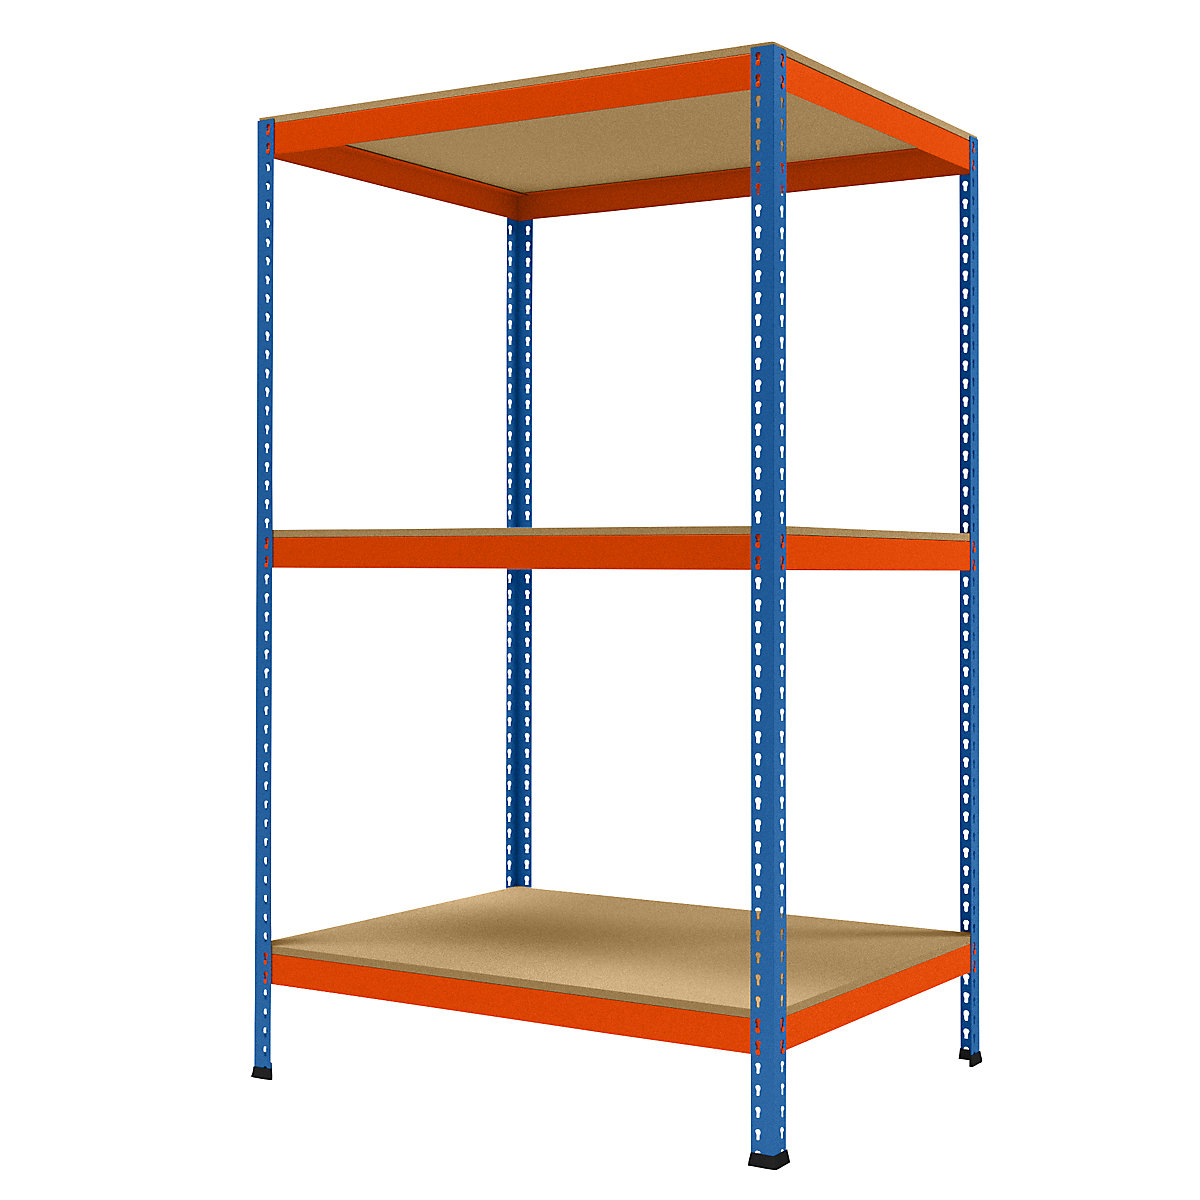 Wide span heavy duty shelving, height 1981 mm, overall depth 926 mm, width 1231 mm